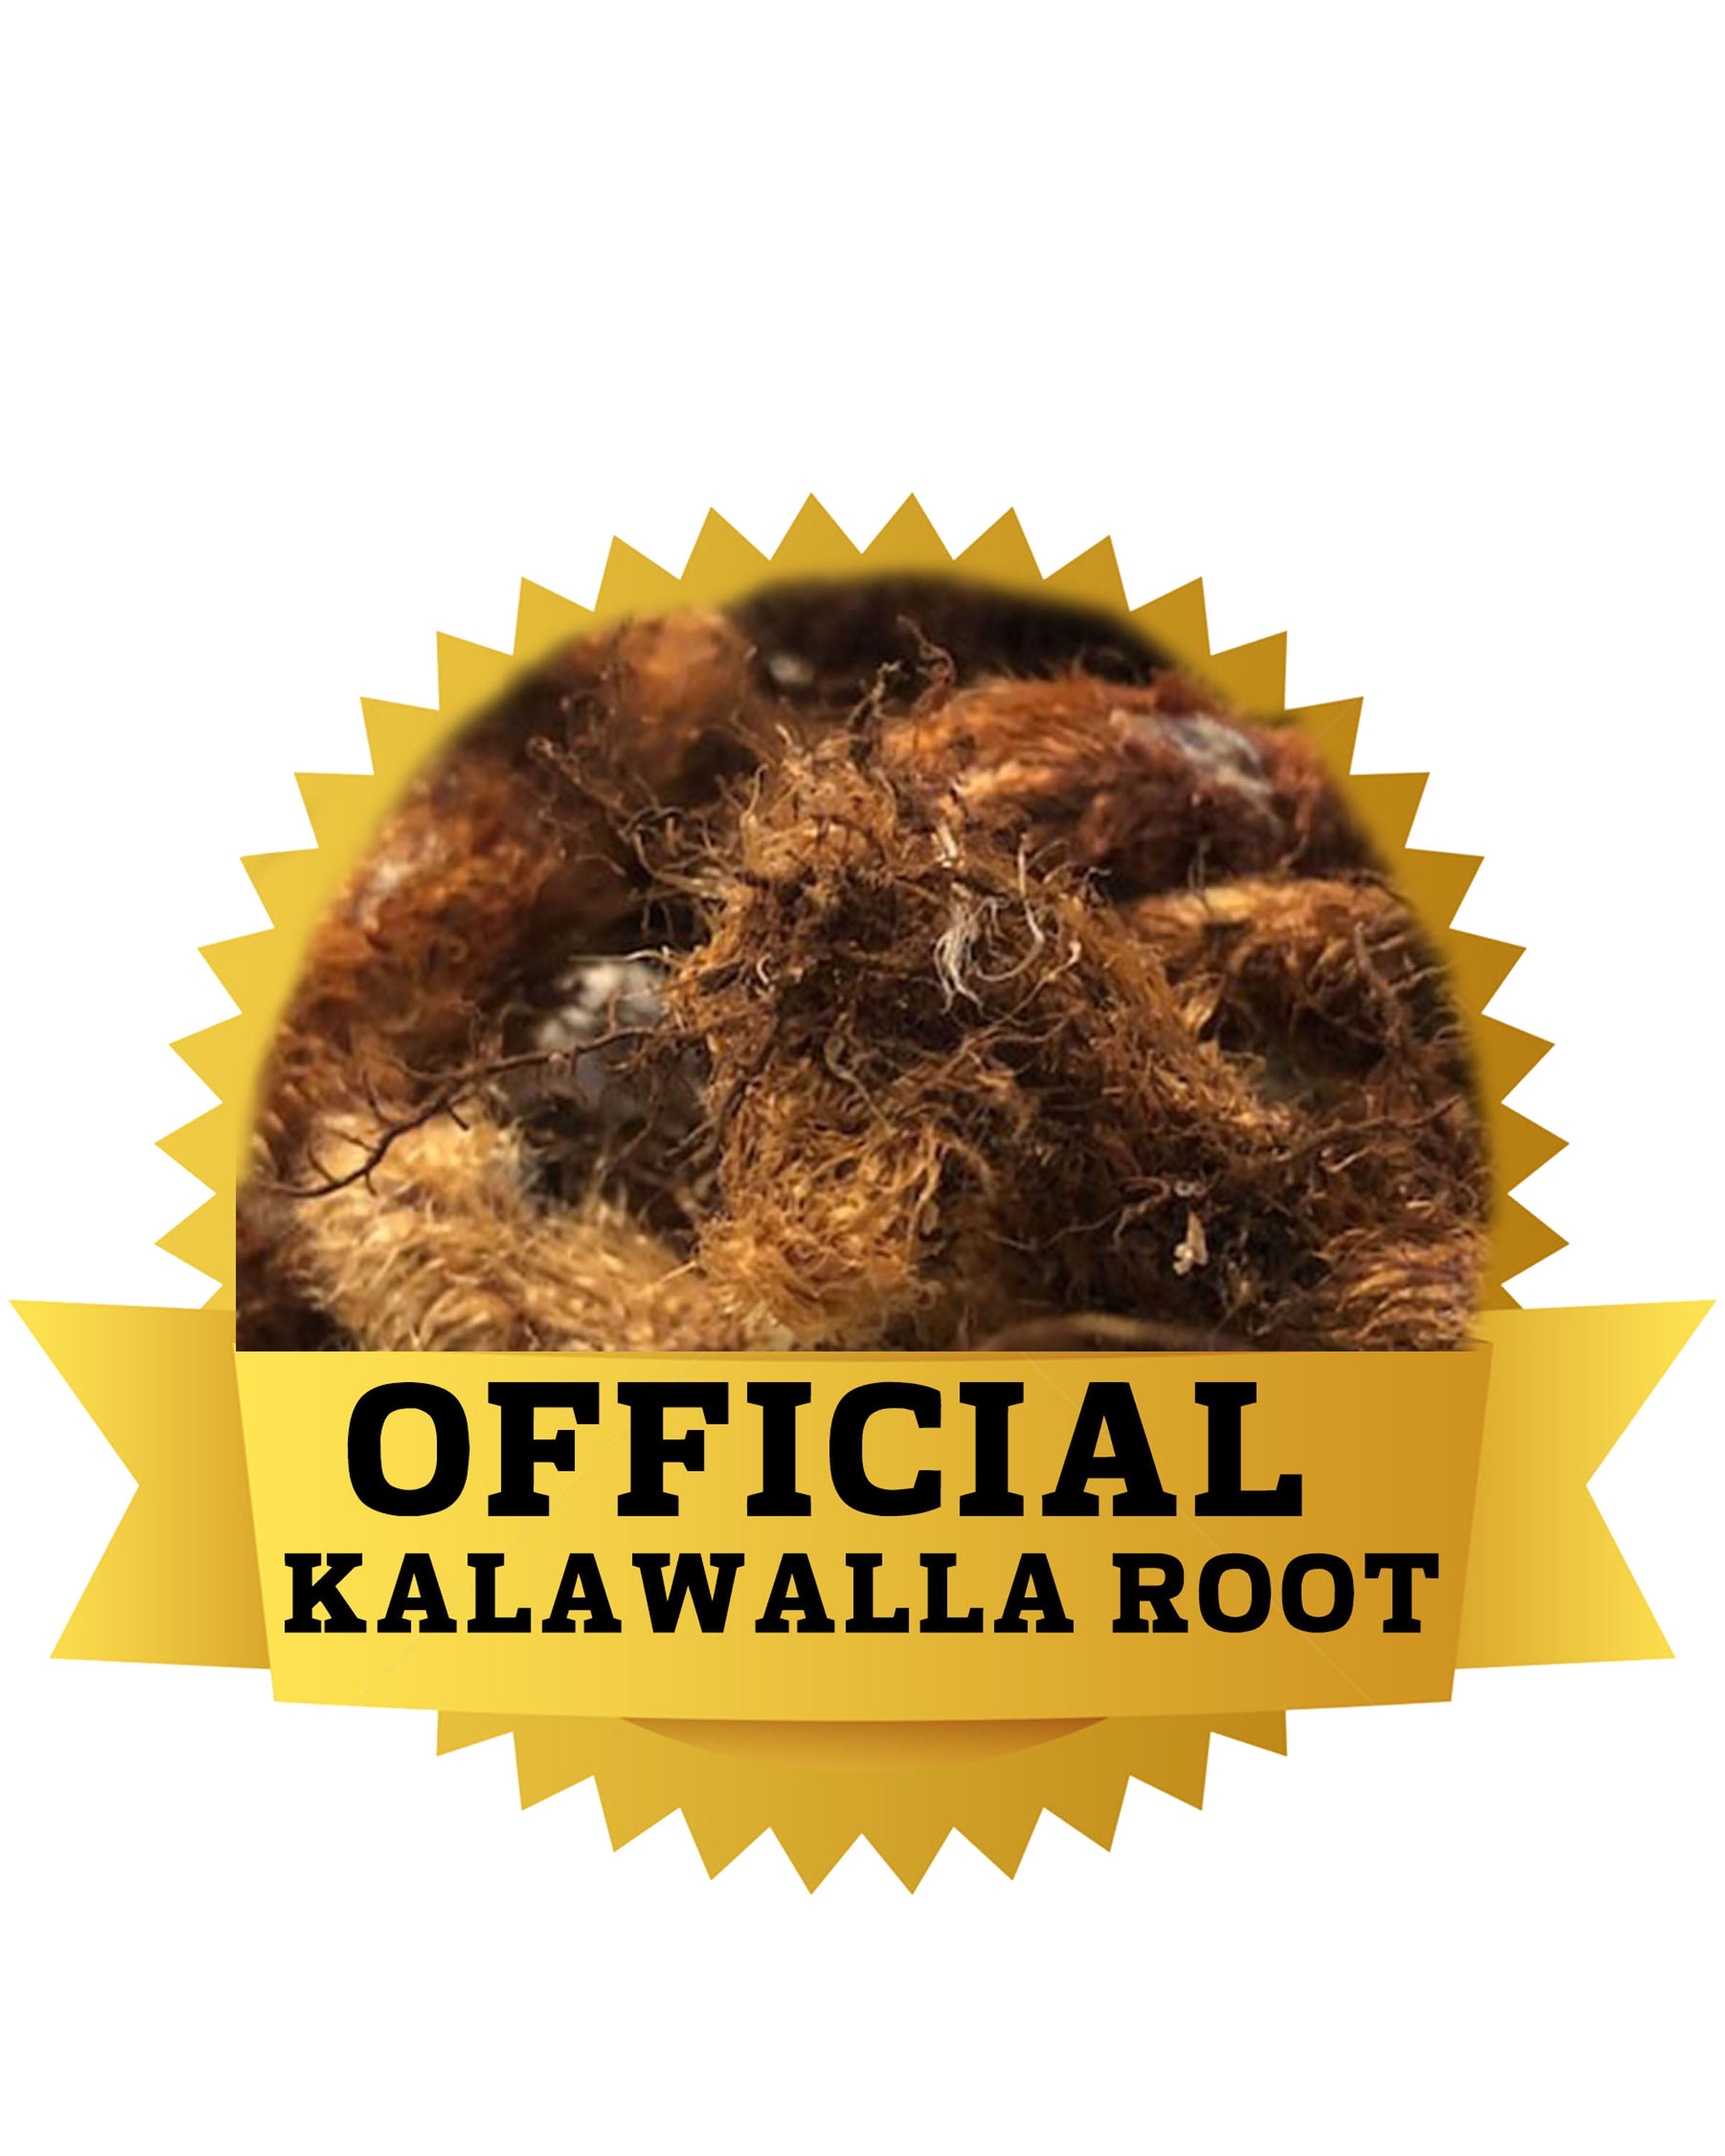 OFFICIAL KALAWALLA ROOT capsules – OFFICIAL HERBZ health